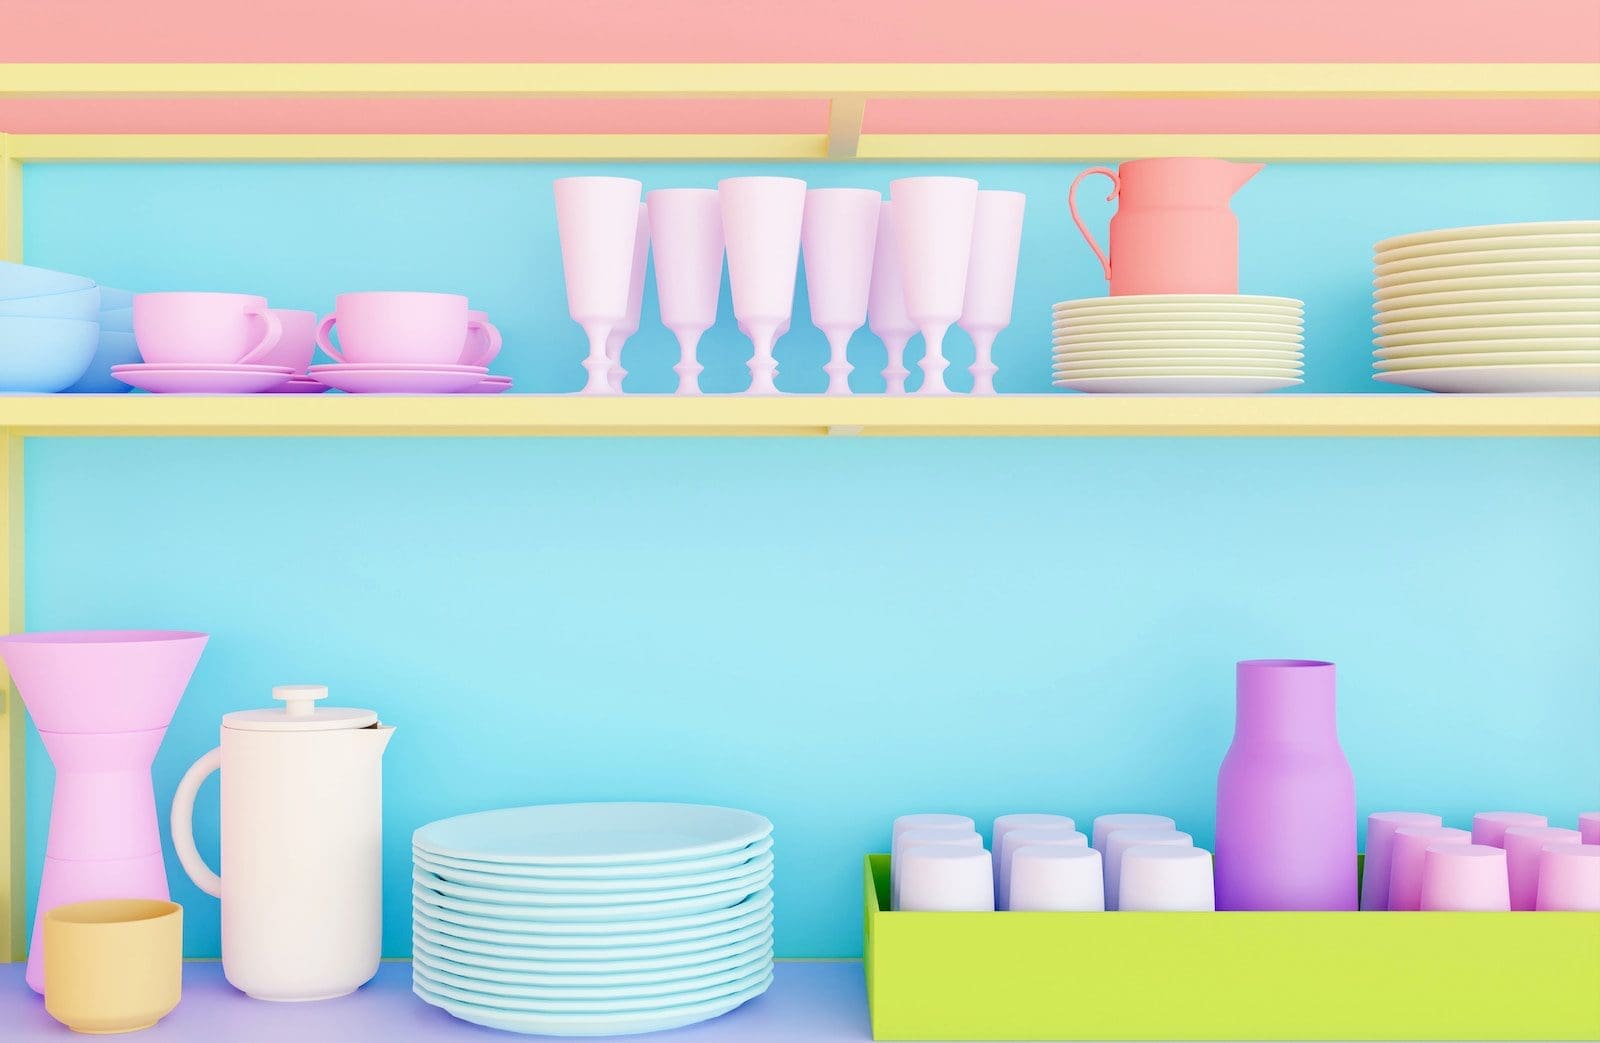 a shelf filled with plates and cups on top of a blue wall